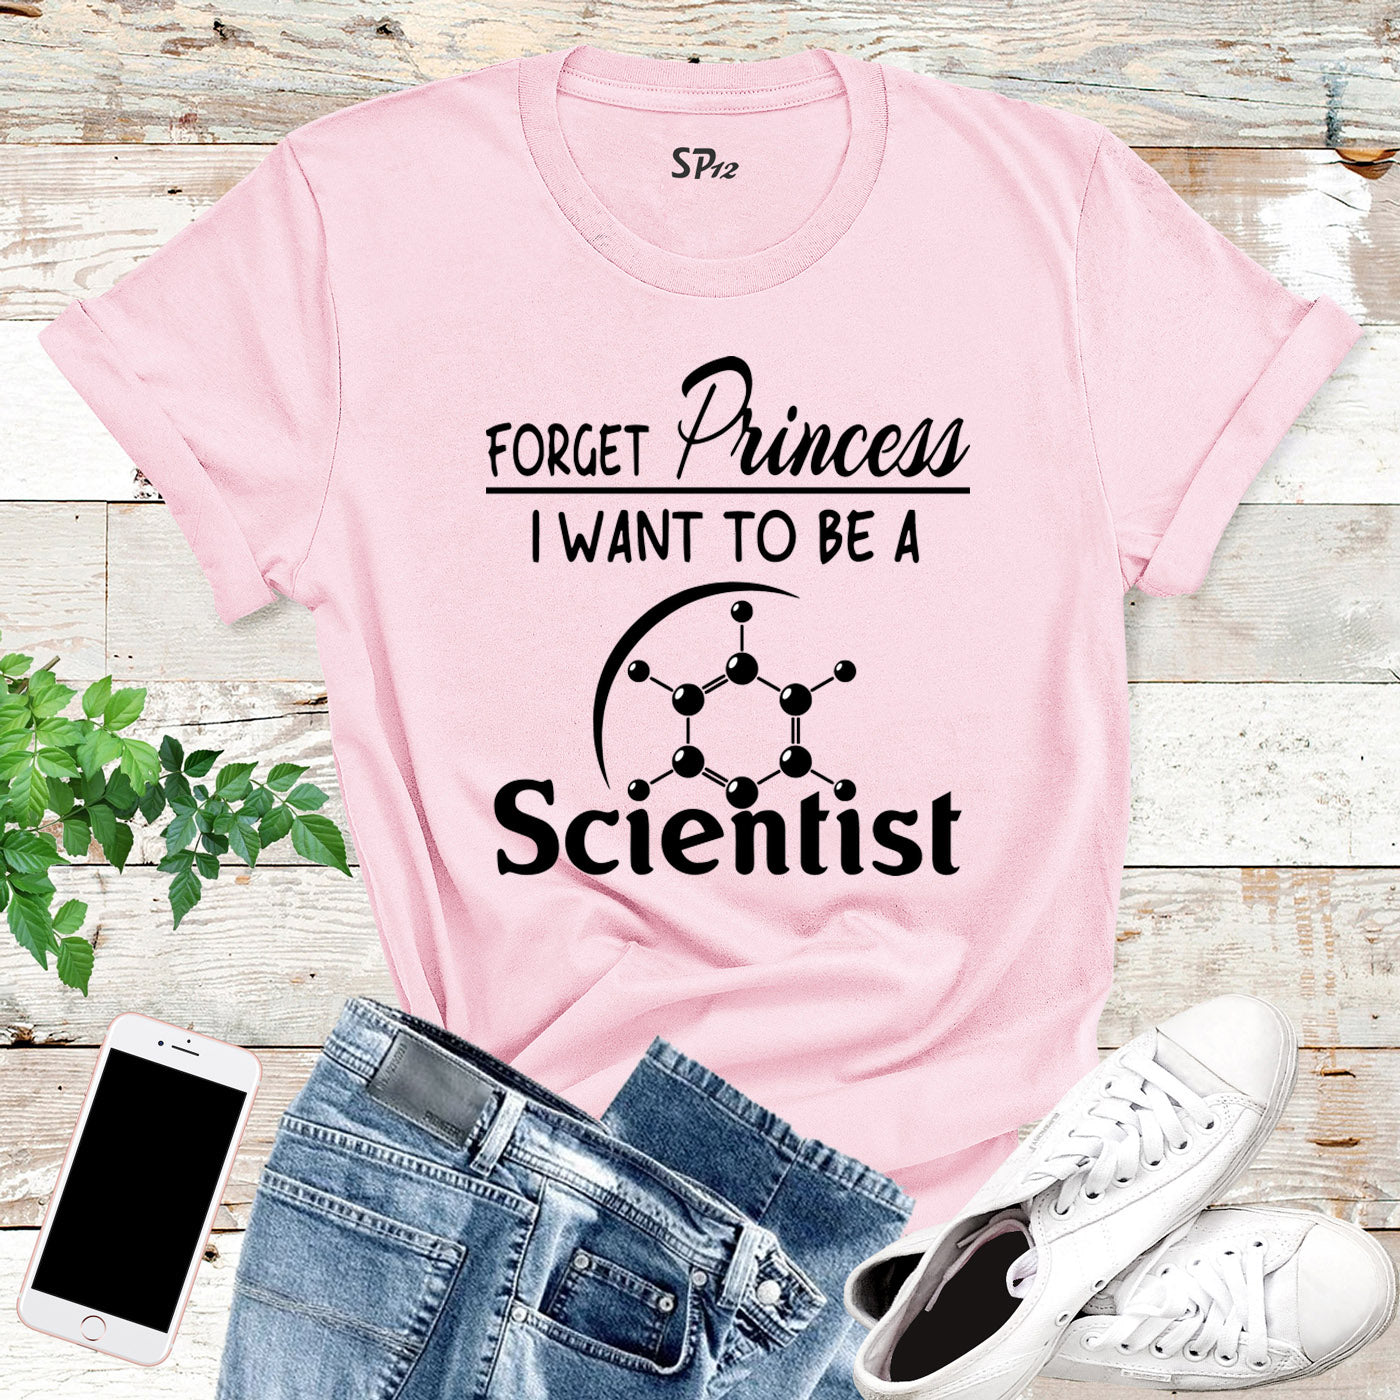 Forget Princess I want to be a Scientist T Shirt